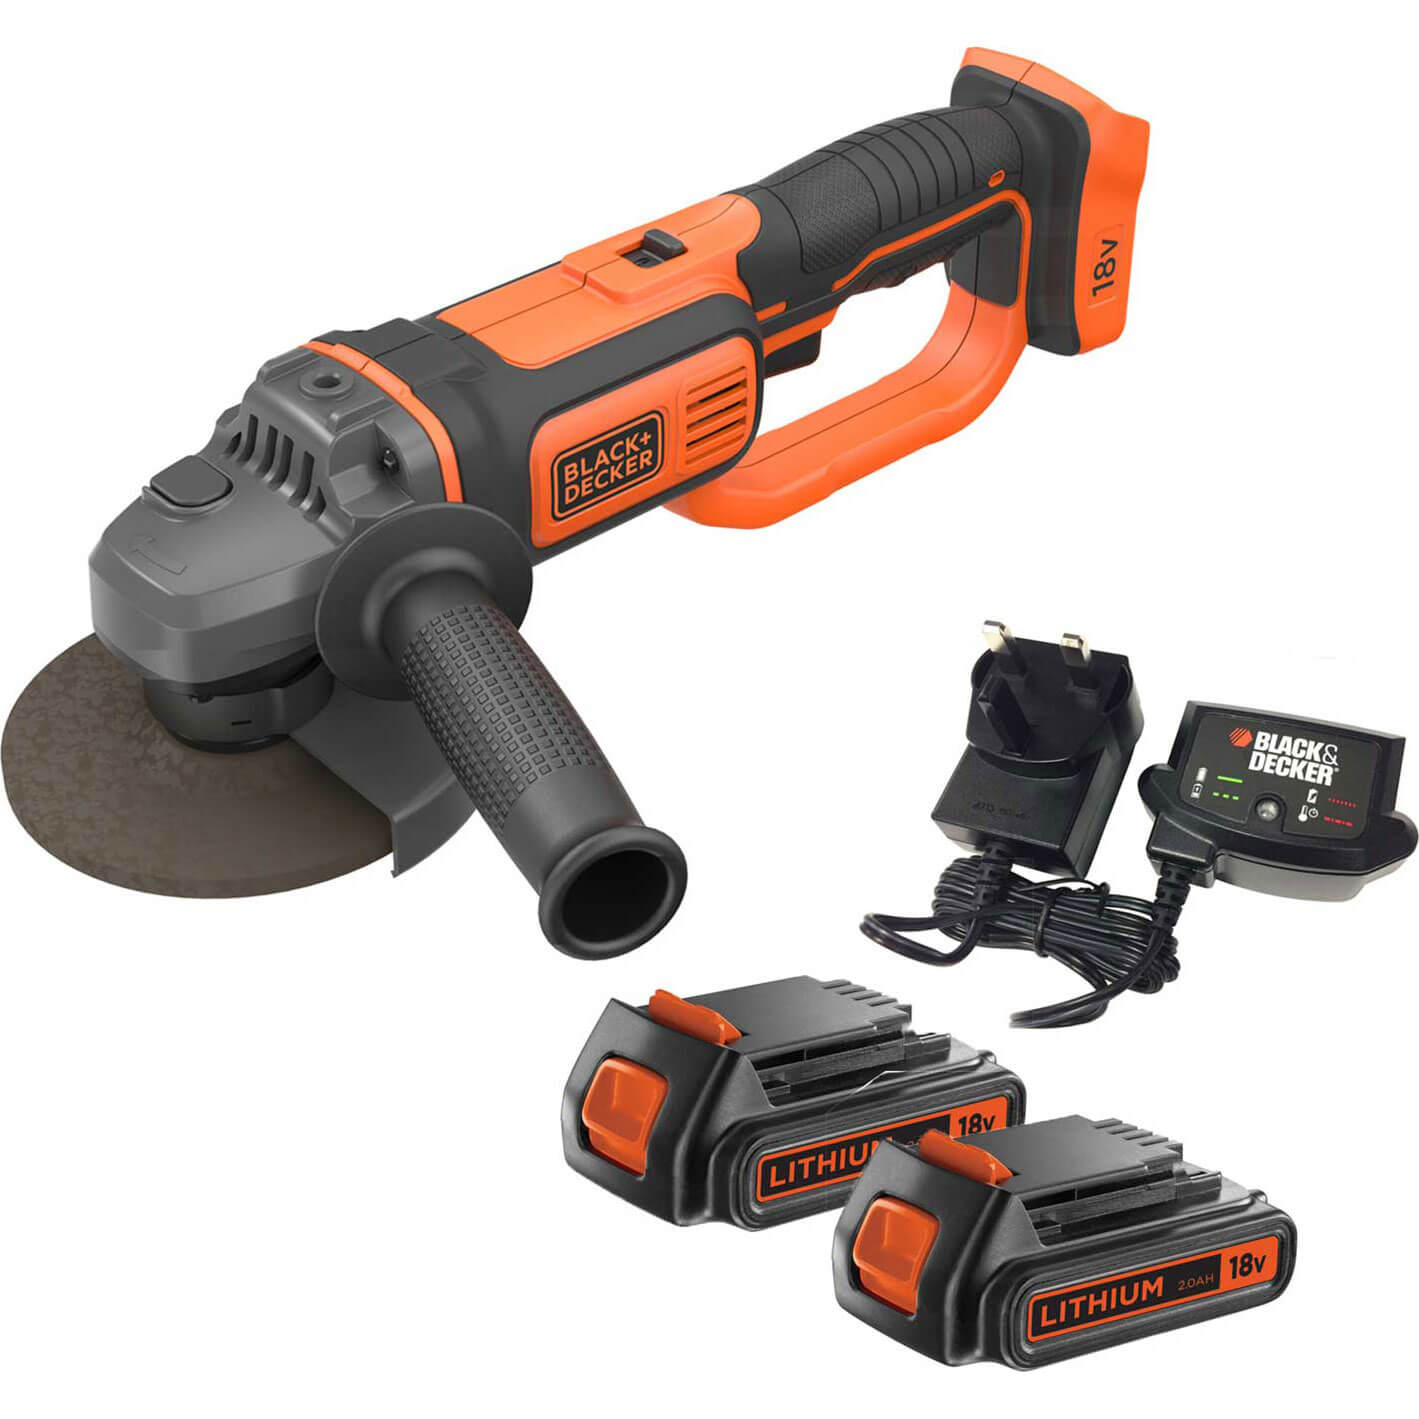 Image of Black and Decker BCG720 18v Cordless Angle Grinder 125mm 2 x 2ah Li-ion Charger No Case